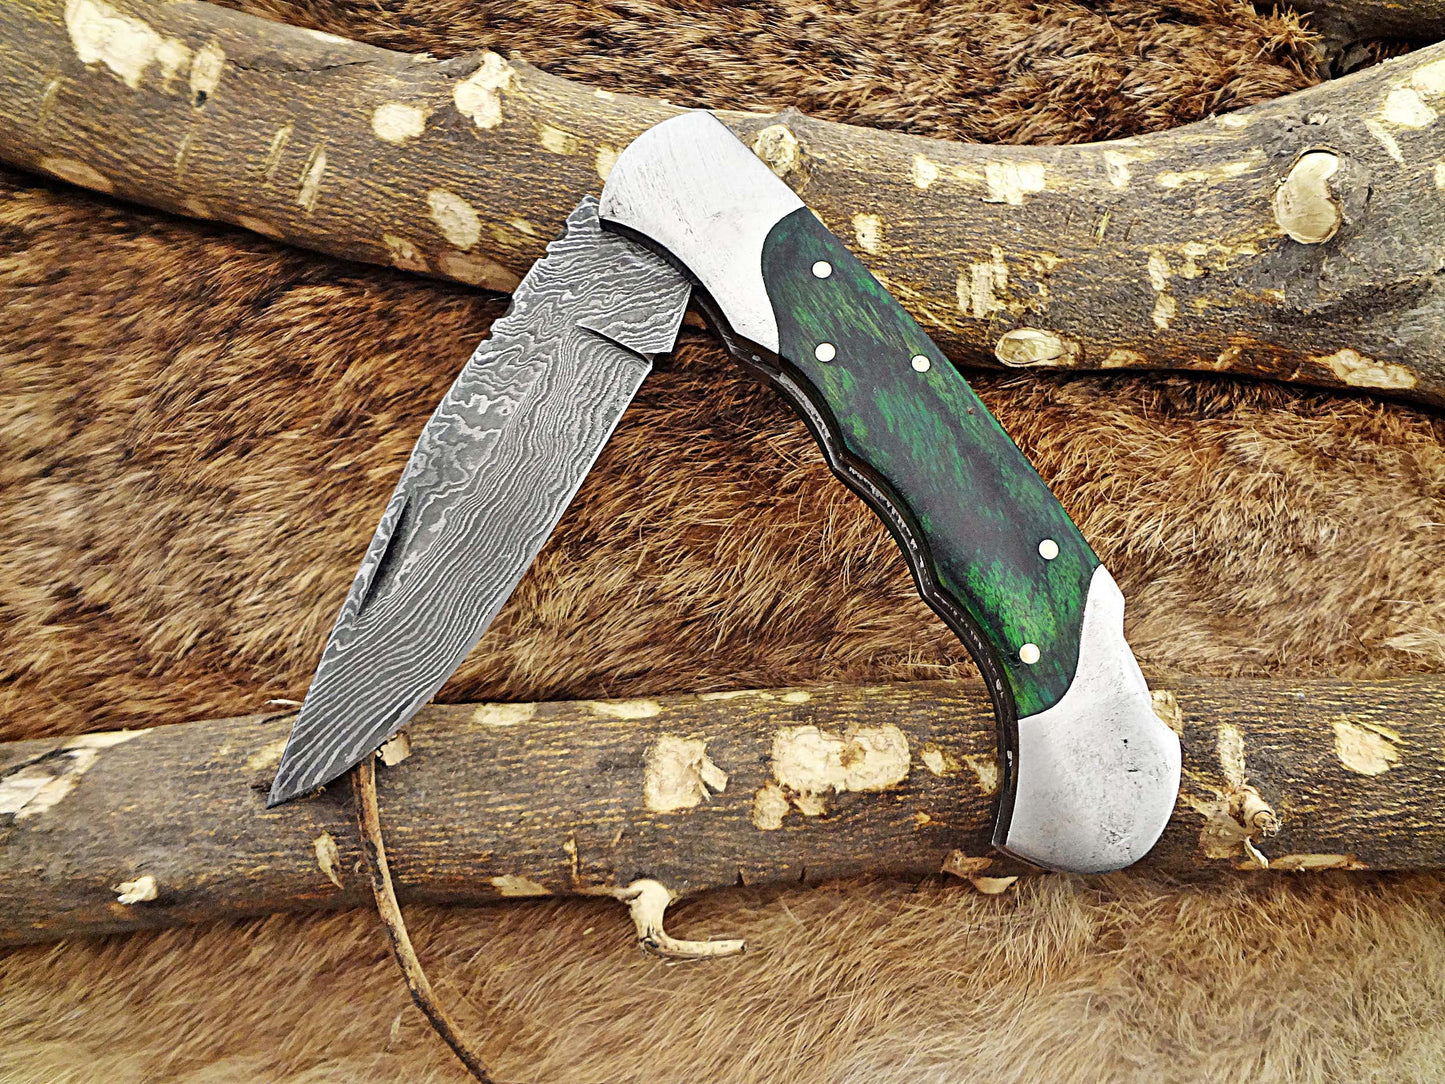 8" long Damascus steel Folding Knife, 2 Tone Green wood with Steel bolster scale, custom made 3.5" Hand Forged blade cow leather sheath